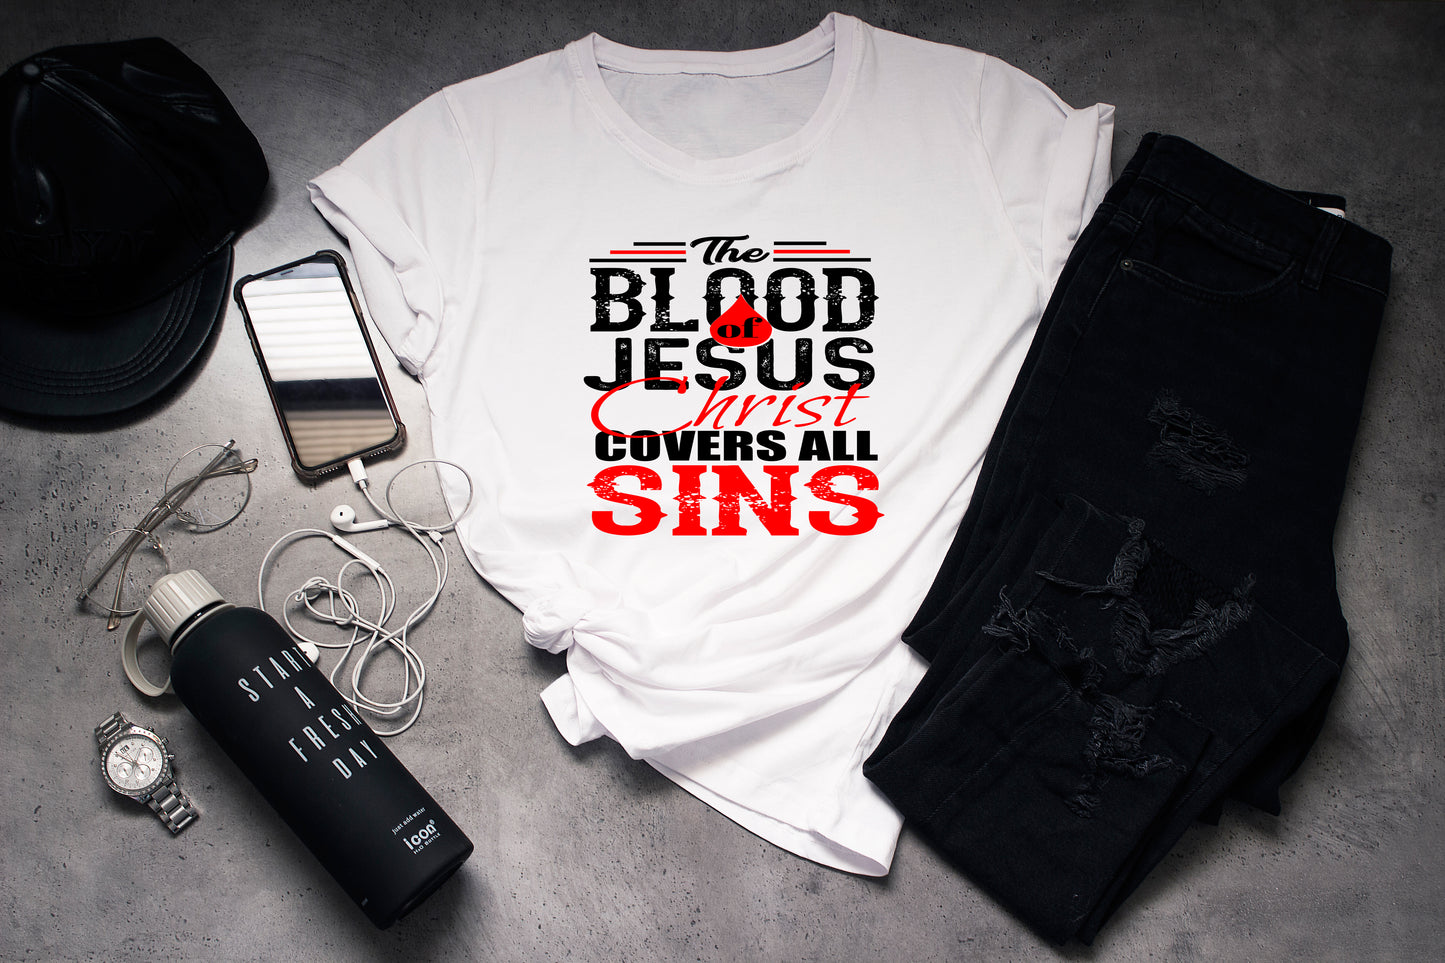 The Blood of Jesus Christ Covers All Sins - Design Colors As Shown Only